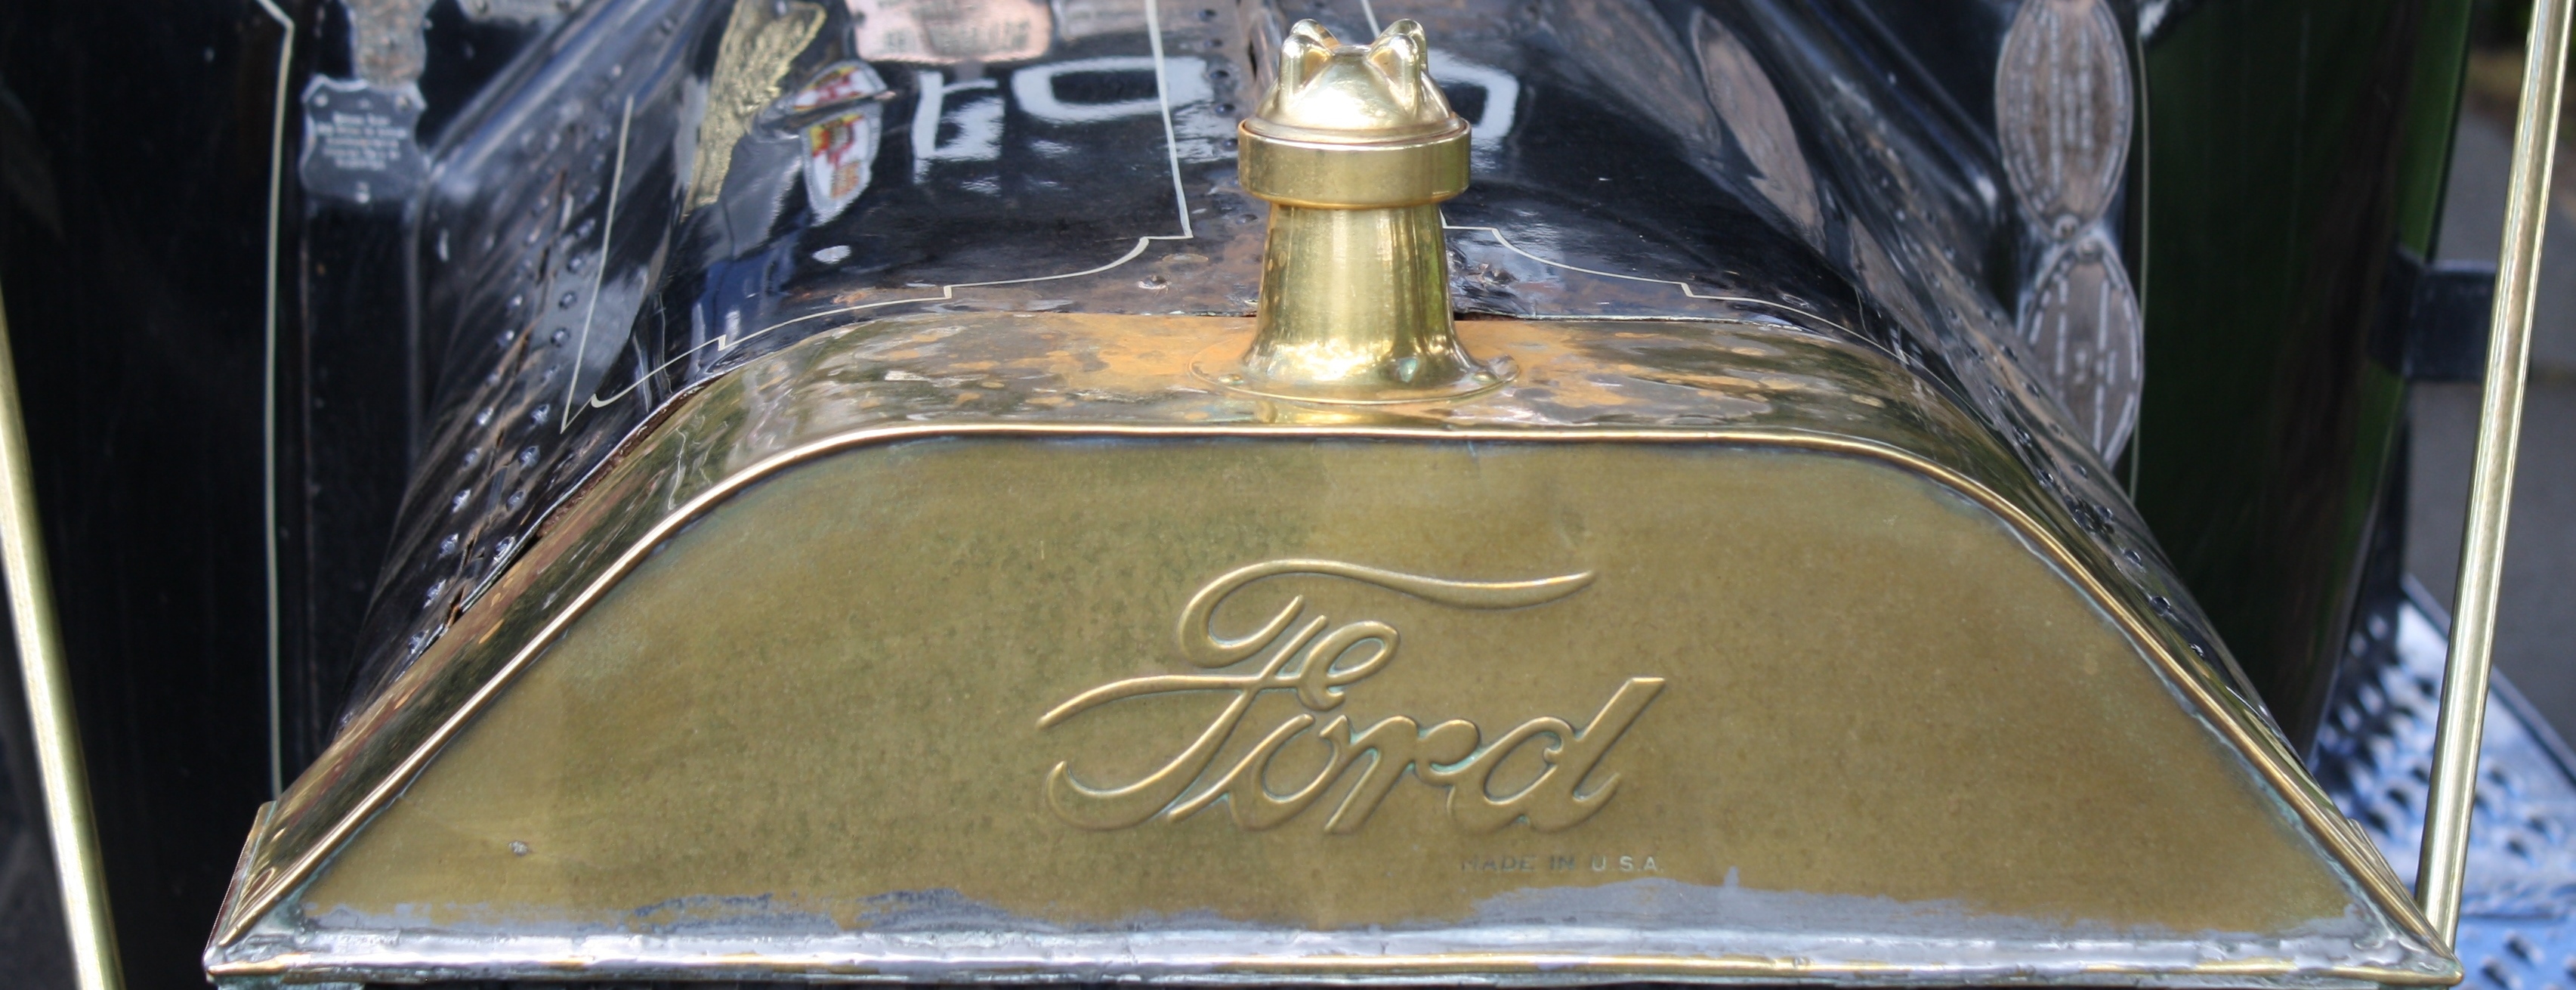 model t ford car pictures